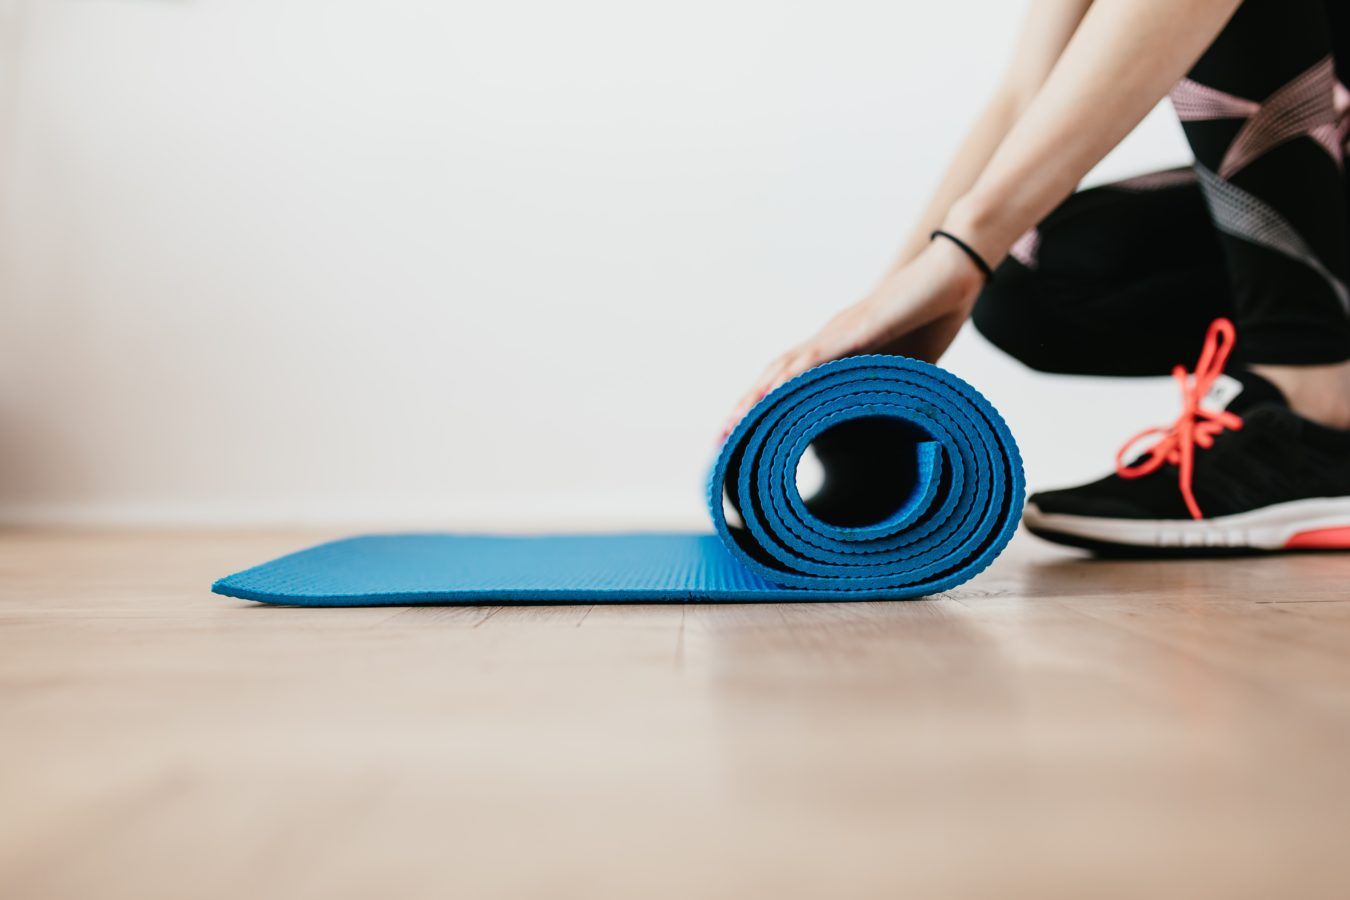 Easy Pilates workouts for beginners that you can do at home